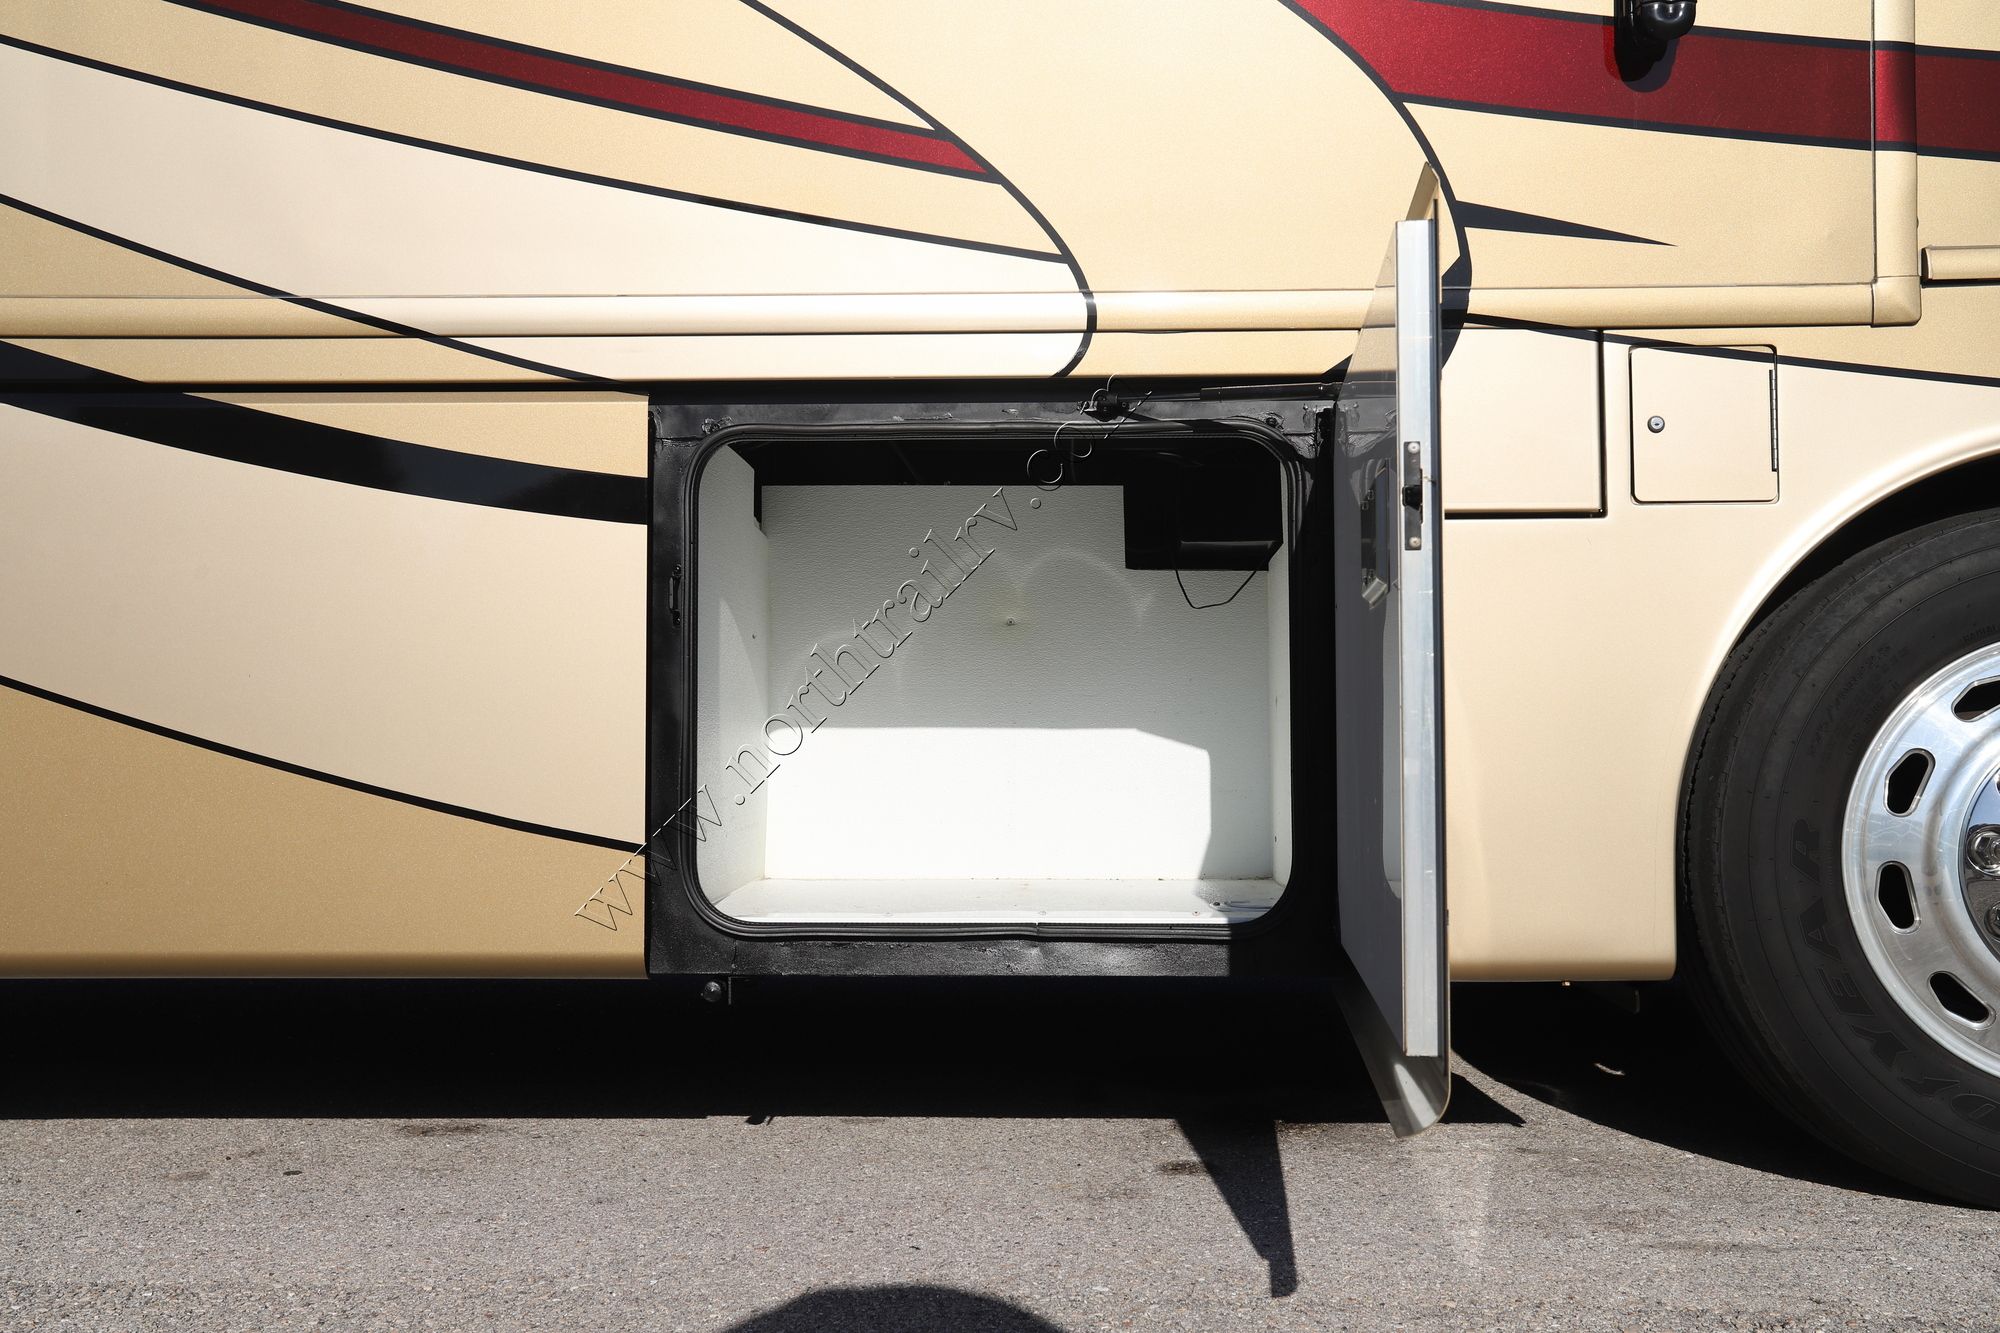 Used 2013 Fleetwood Discovery 40G Class A  For Sale